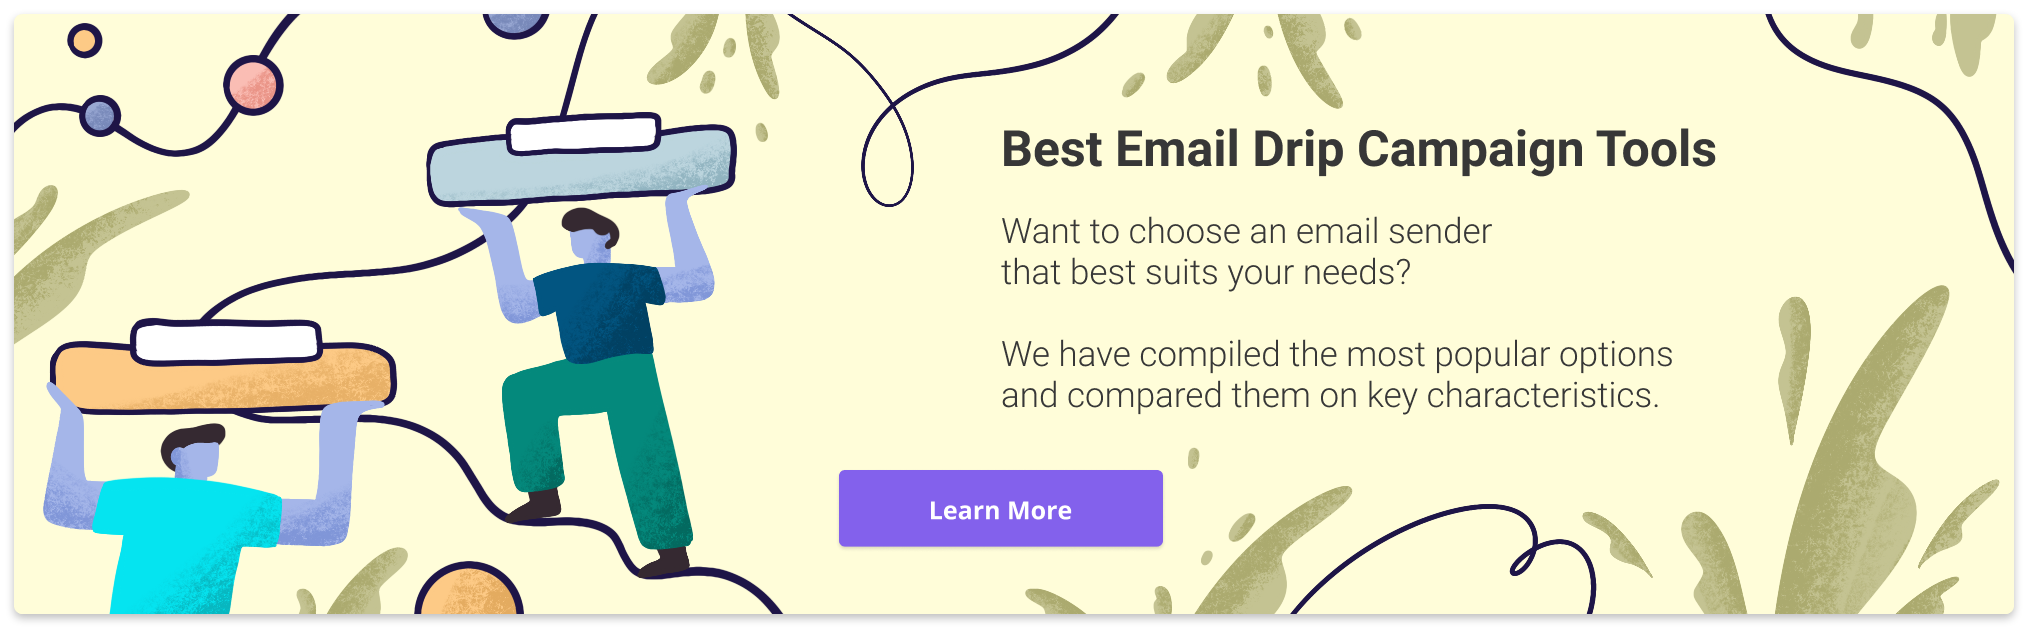 best email drip campaign tools